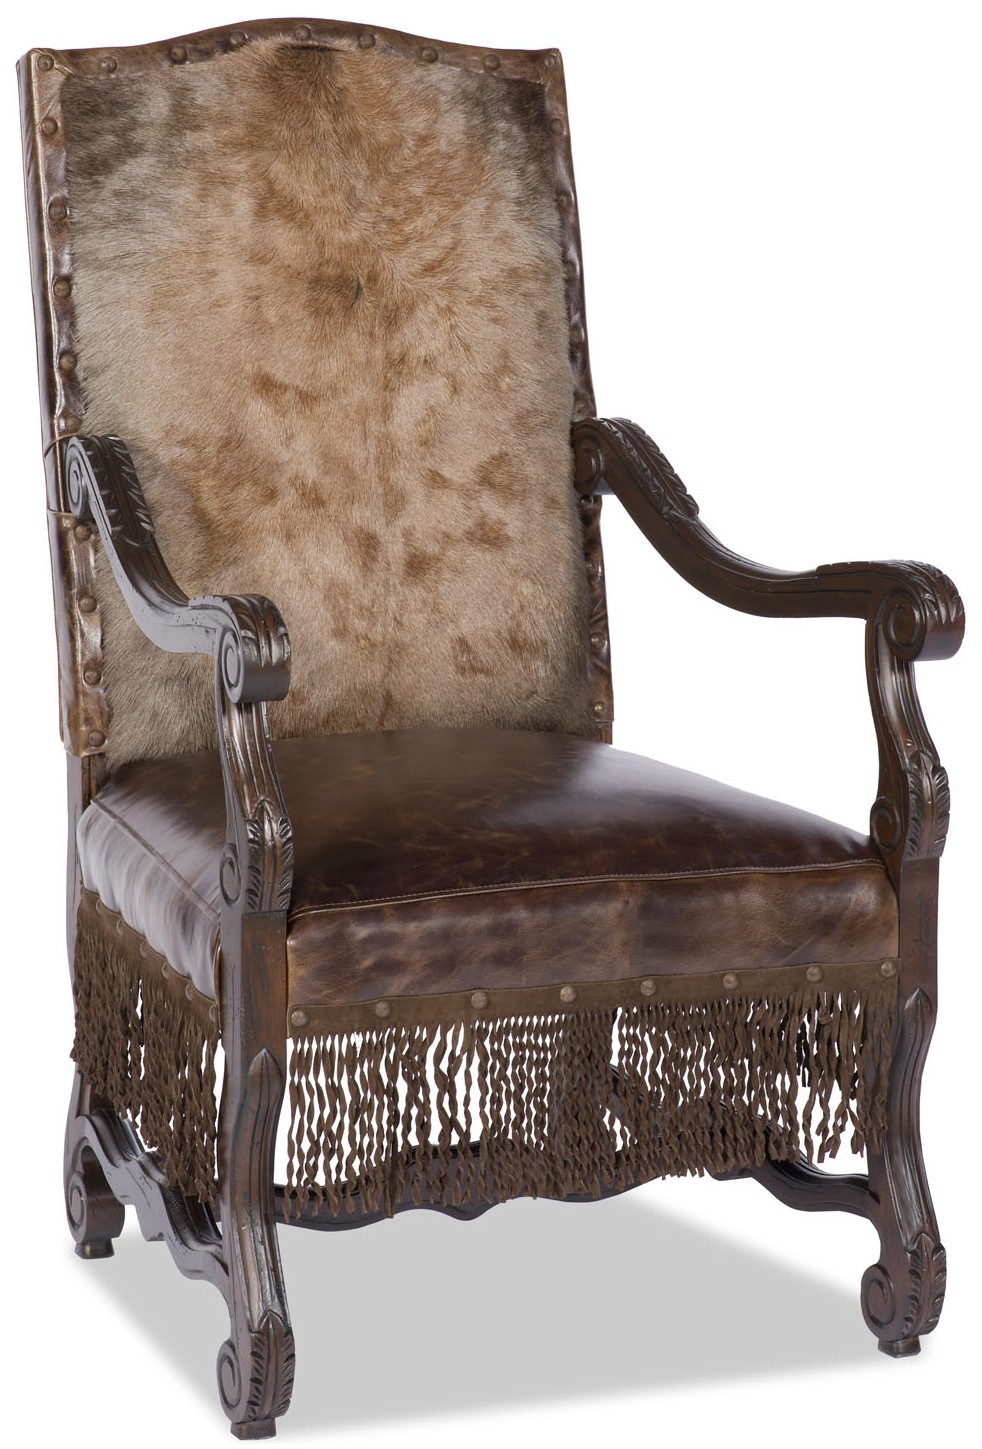 CHAIRS, Leather, Upholstered, Accent Armchair with hand carved wooden details with fringe